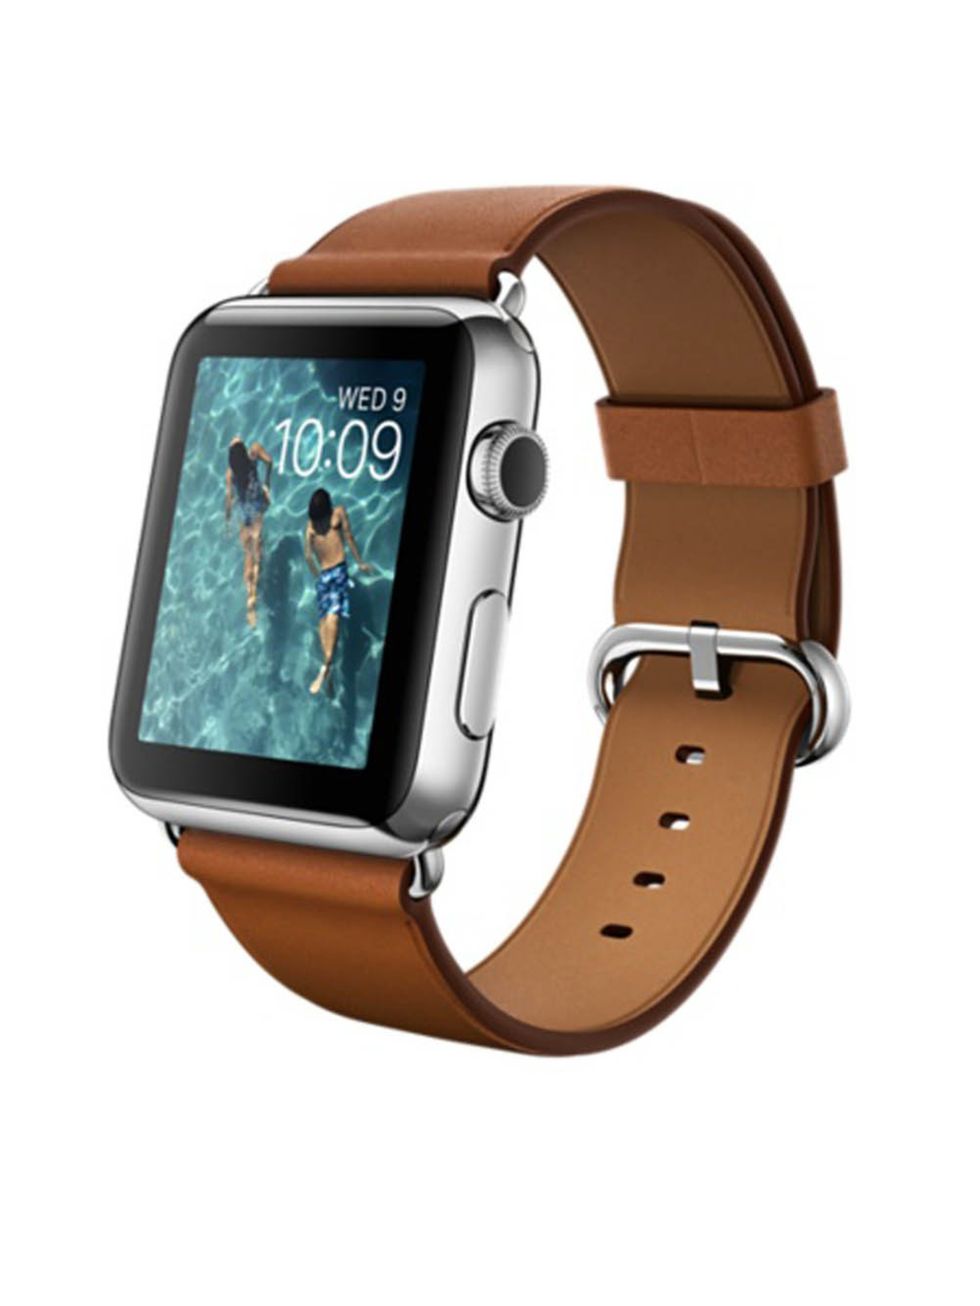 Product, Brown, Watch, Display device, Gadget, Electronic device, Watch accessory, Wrist, Analog watch, Font, 